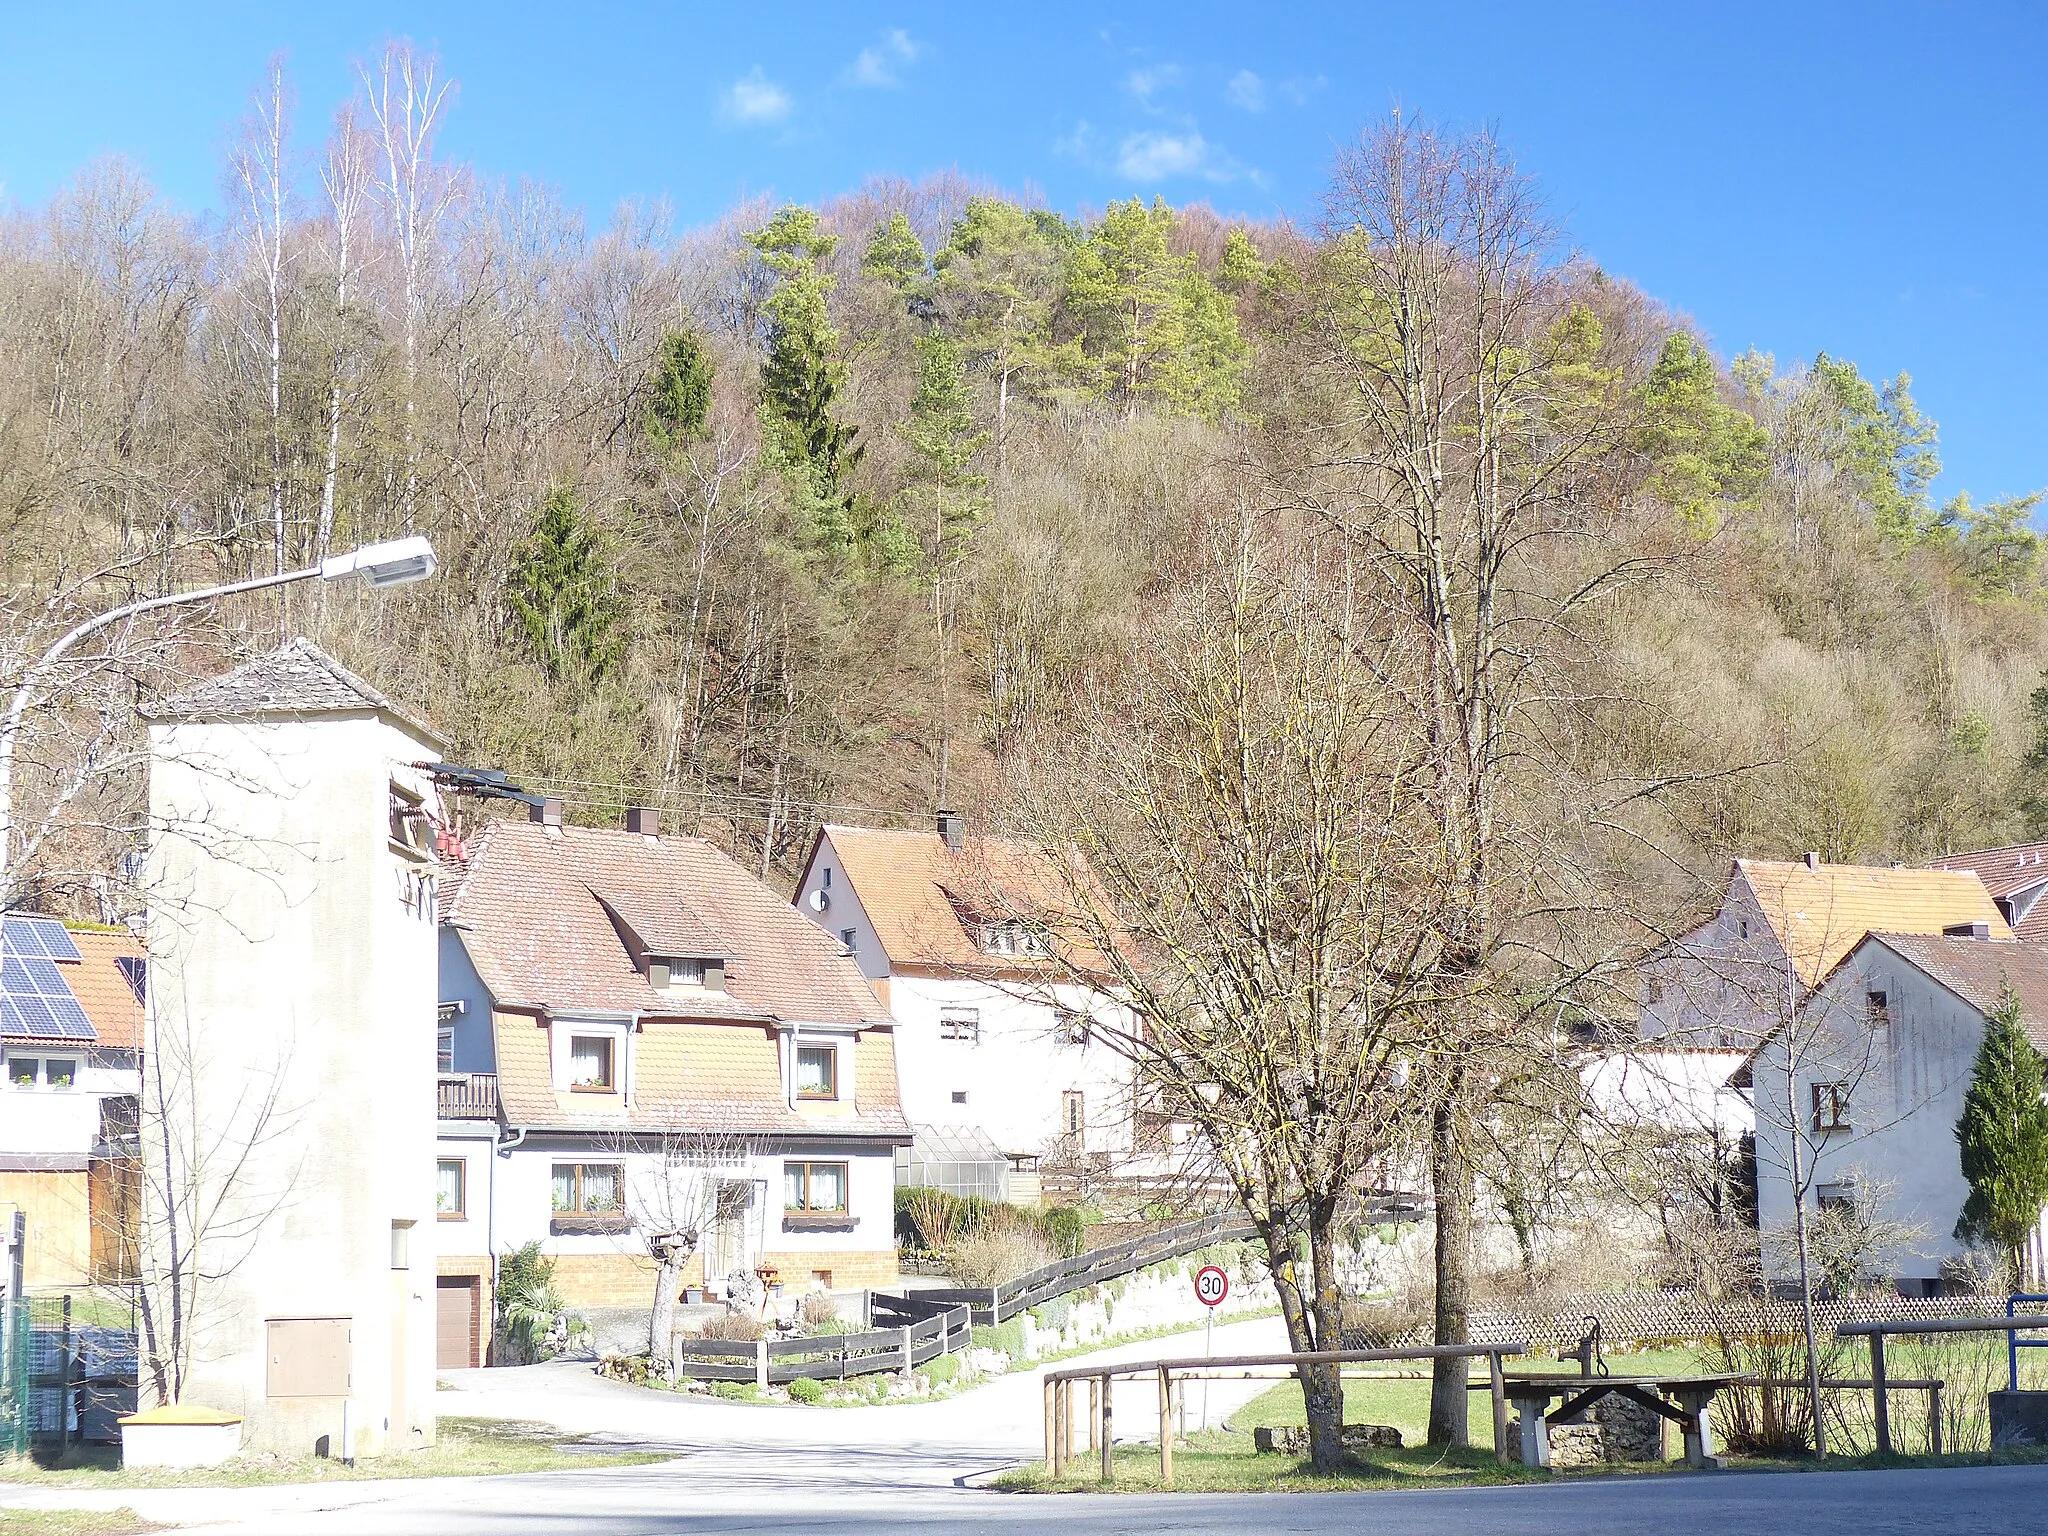 Photo showing: The village Lehenhammer, a district of the municipality of Etzelwang